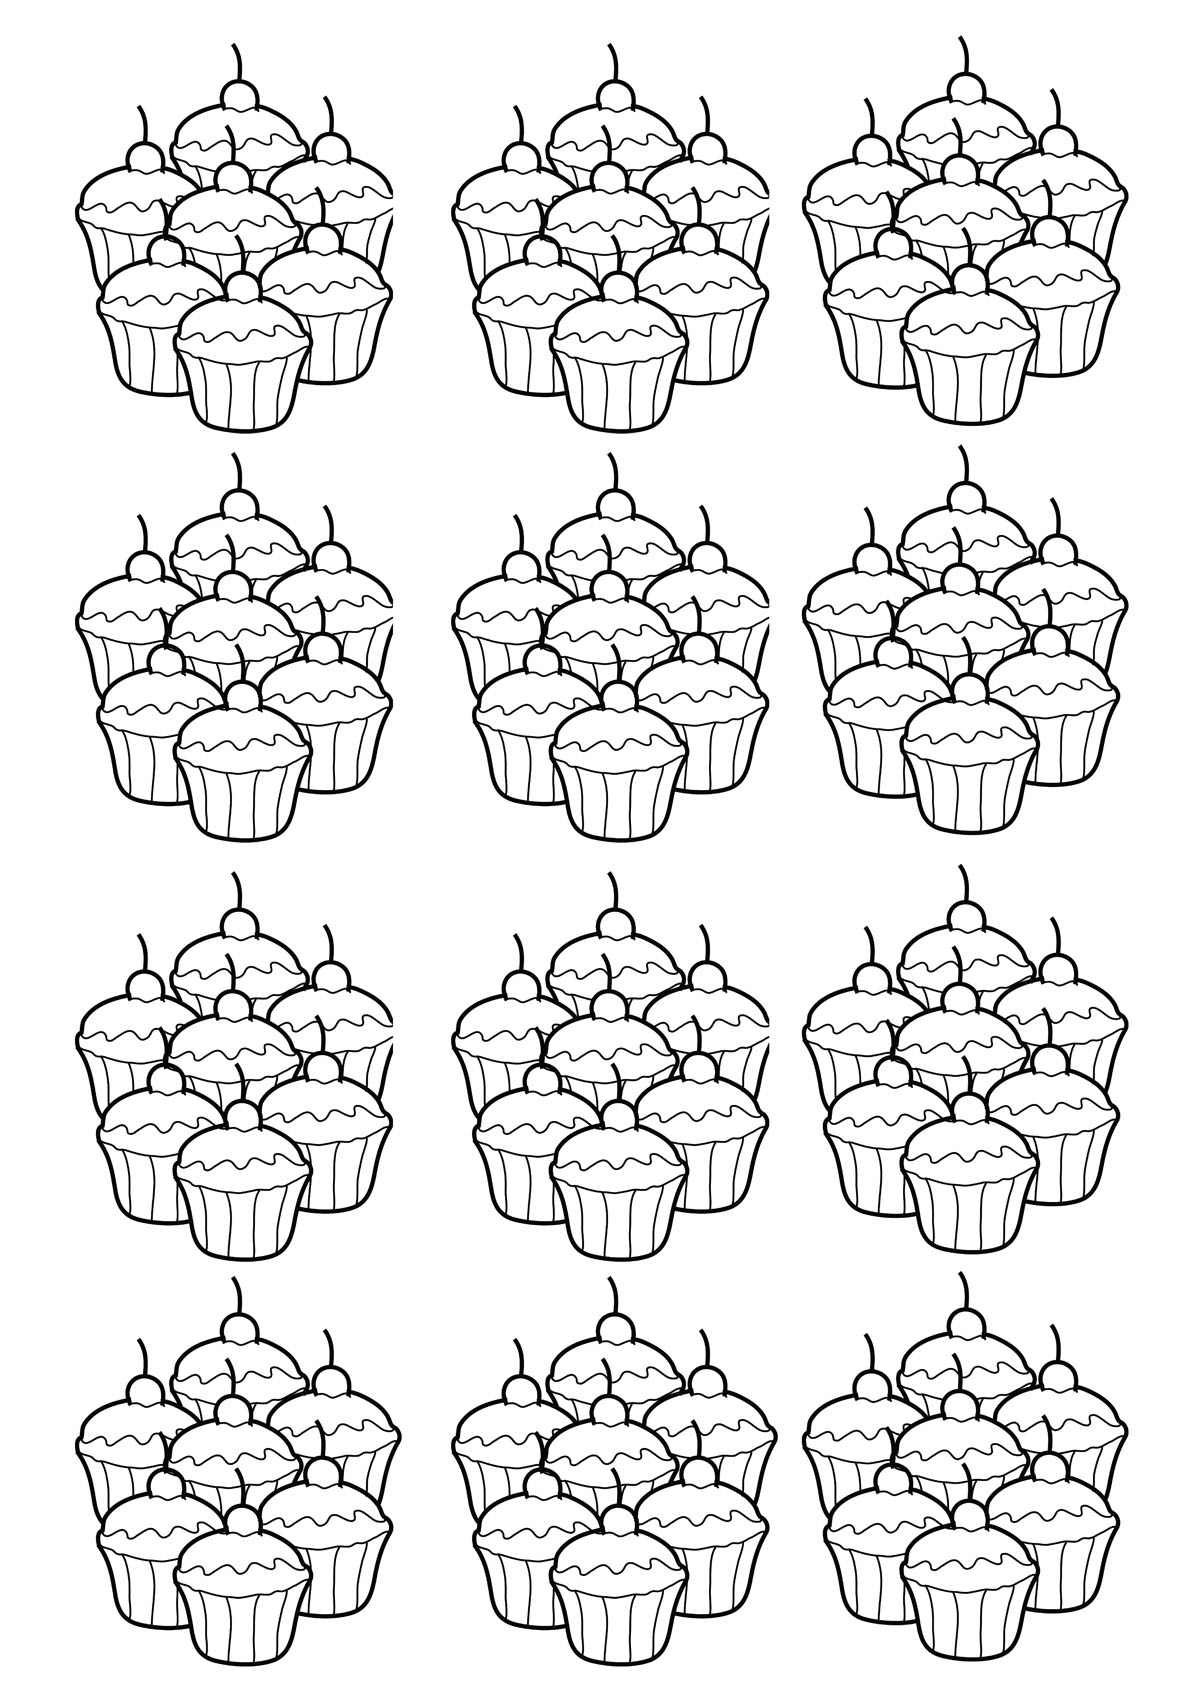 Basic mosaic of cupcakes to color